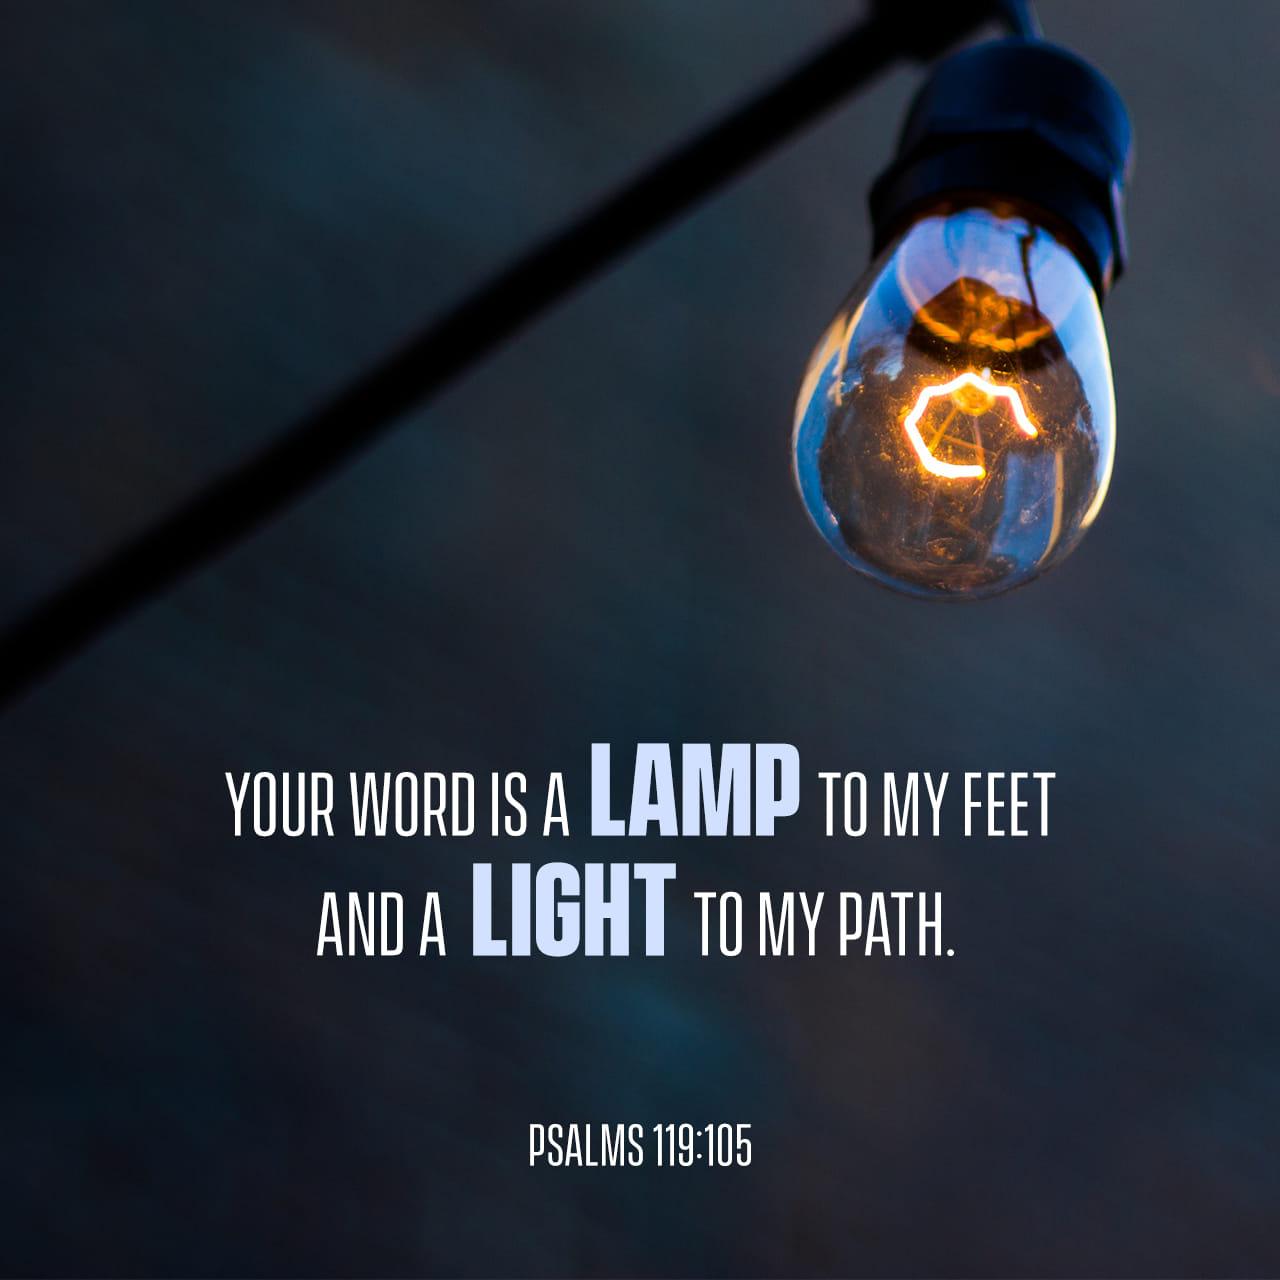 Bible Verse of the Day - day 160 - image 2919 (Psalm 119:105)